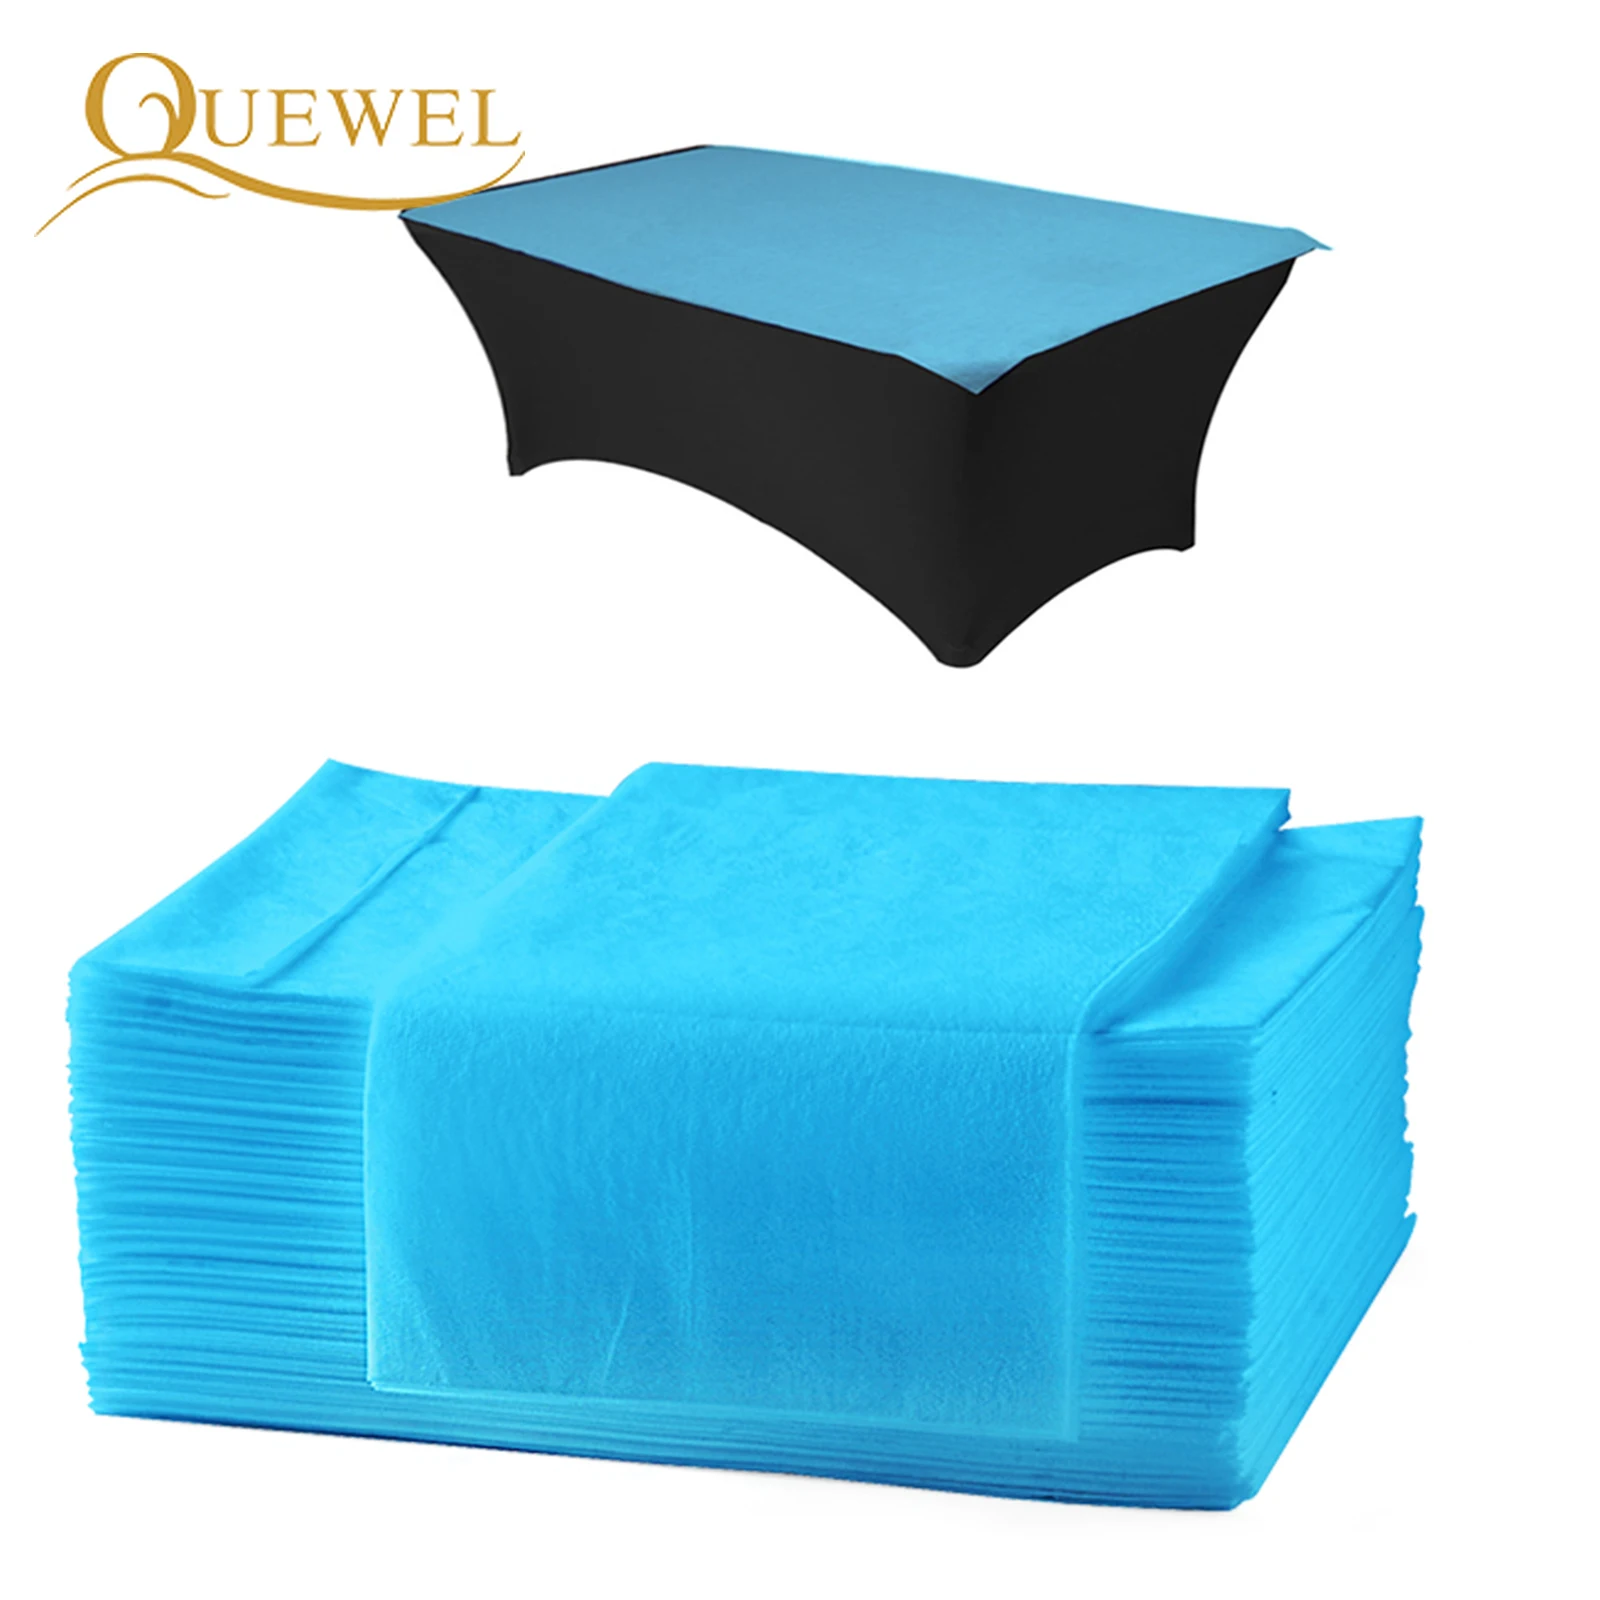 Quewel 5/10/20Pcs Beauty Sheets Disposable Eyelash Extensions Grafting Salon Bed Cover Breathable Non-woven Travel 180x80CM